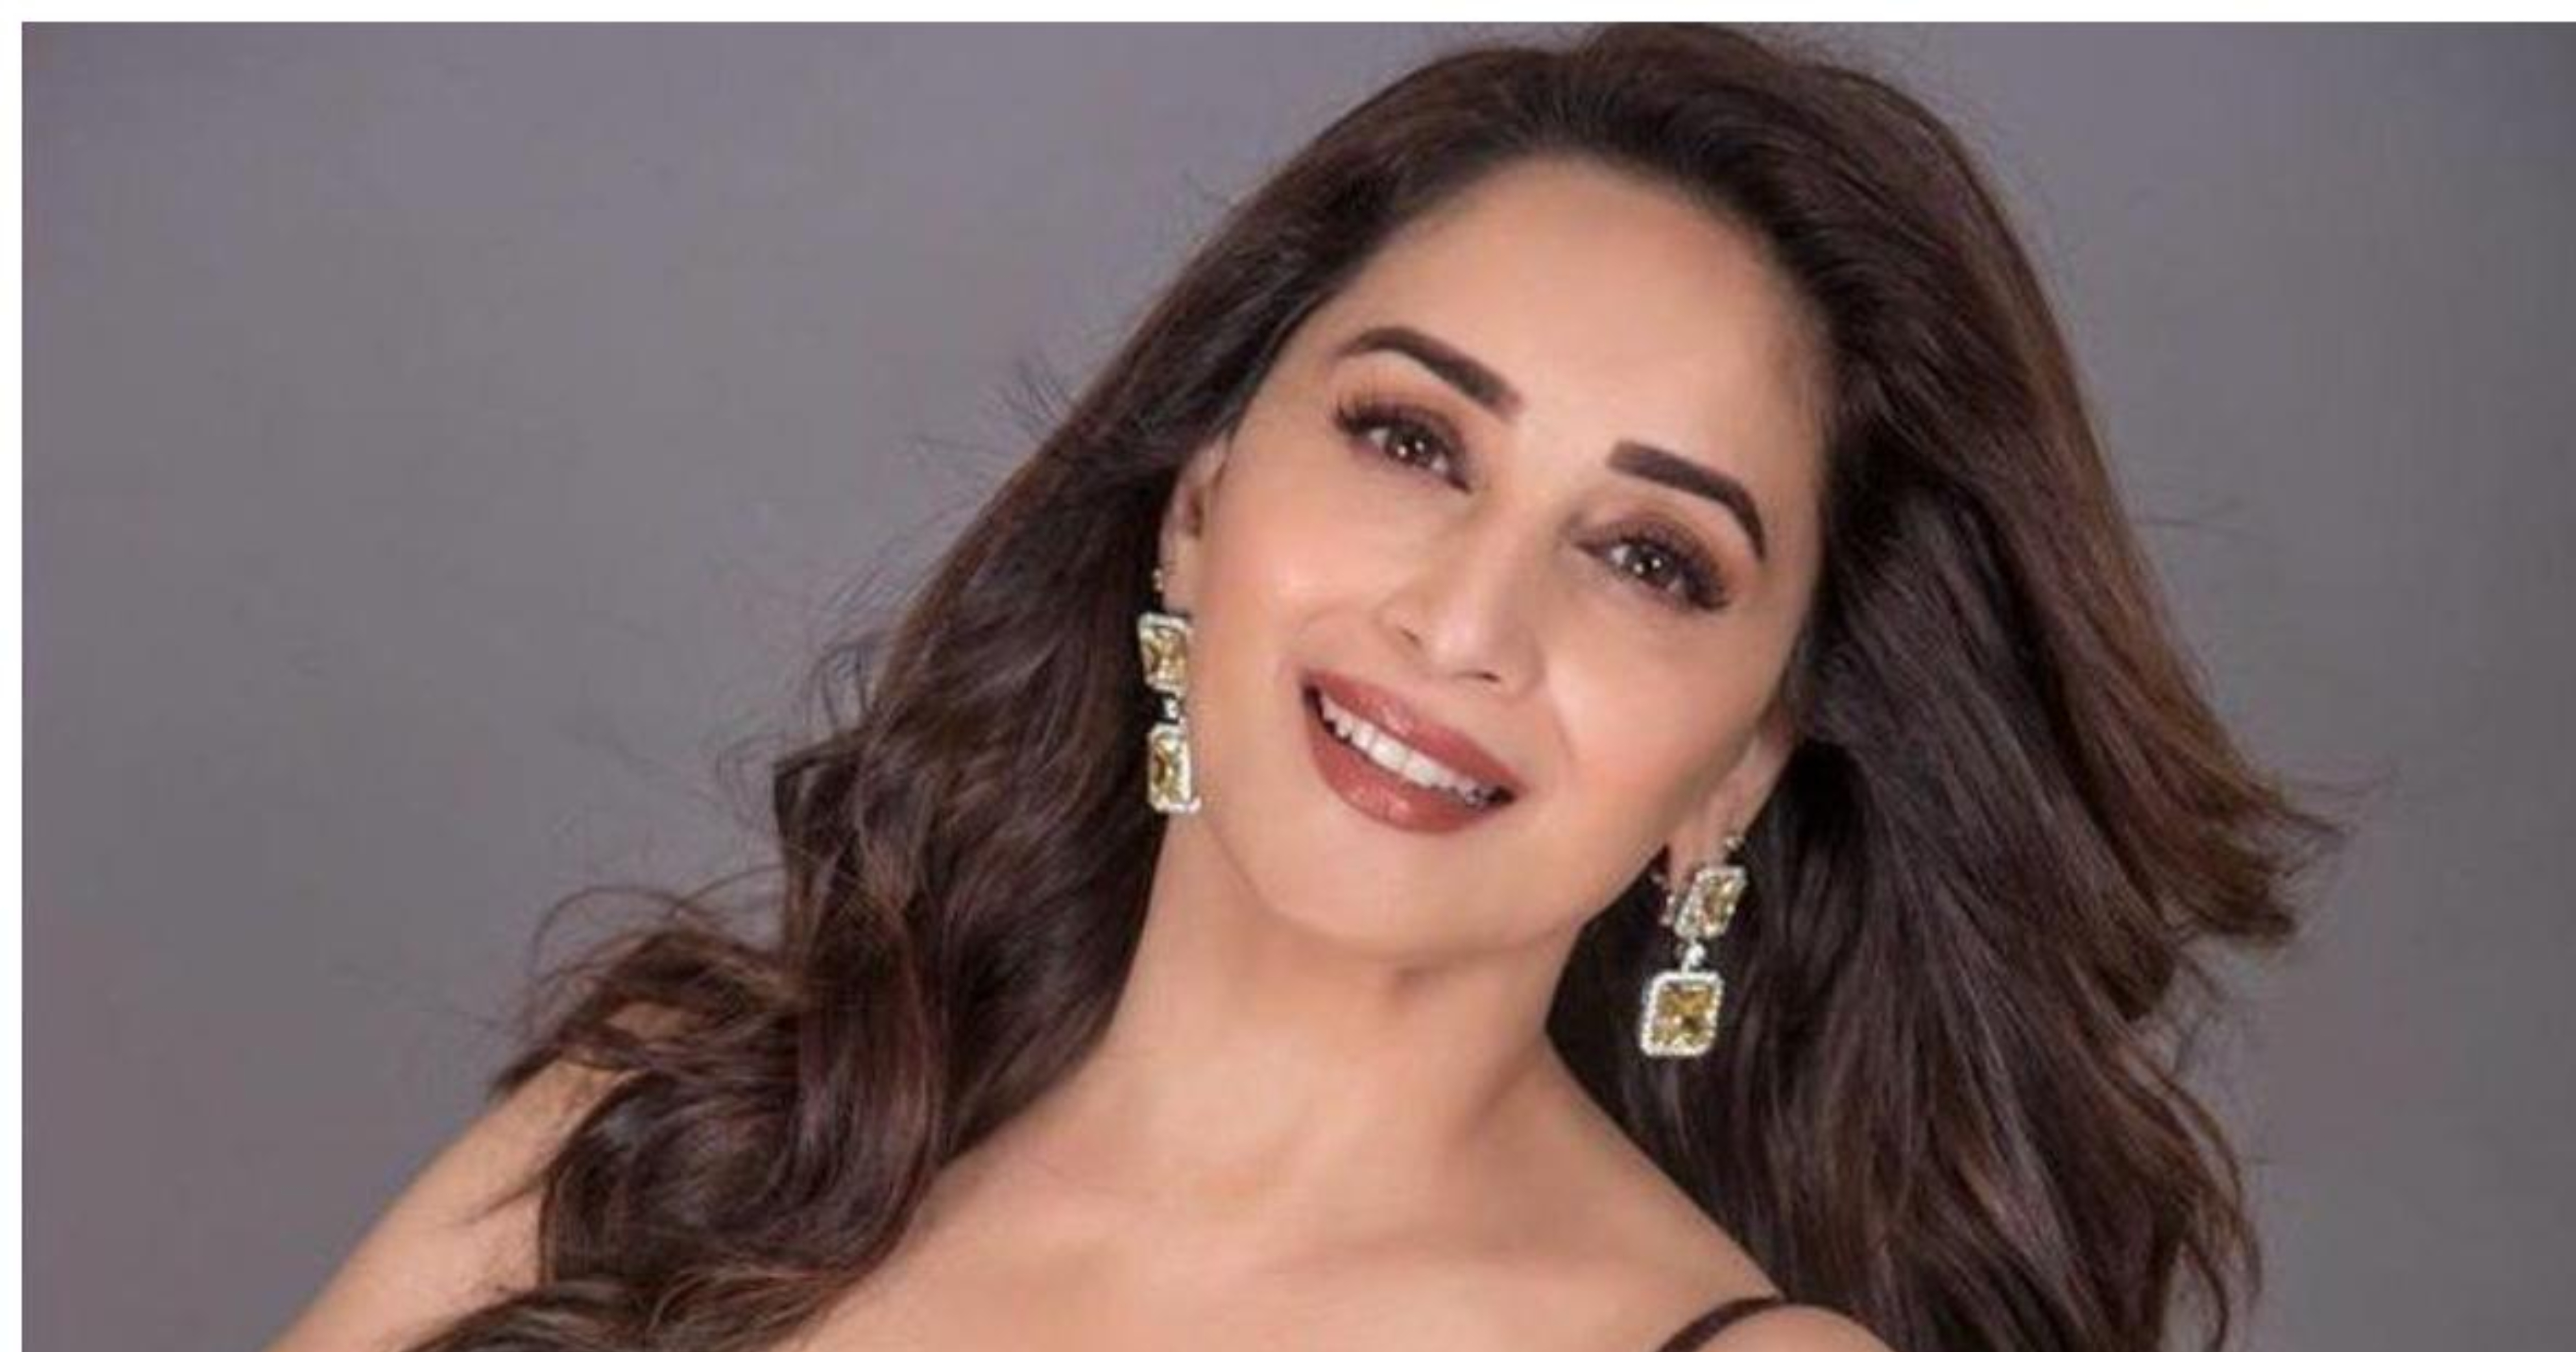 Madhuri Dixit Nene wishes mother on her birthday with adorable video